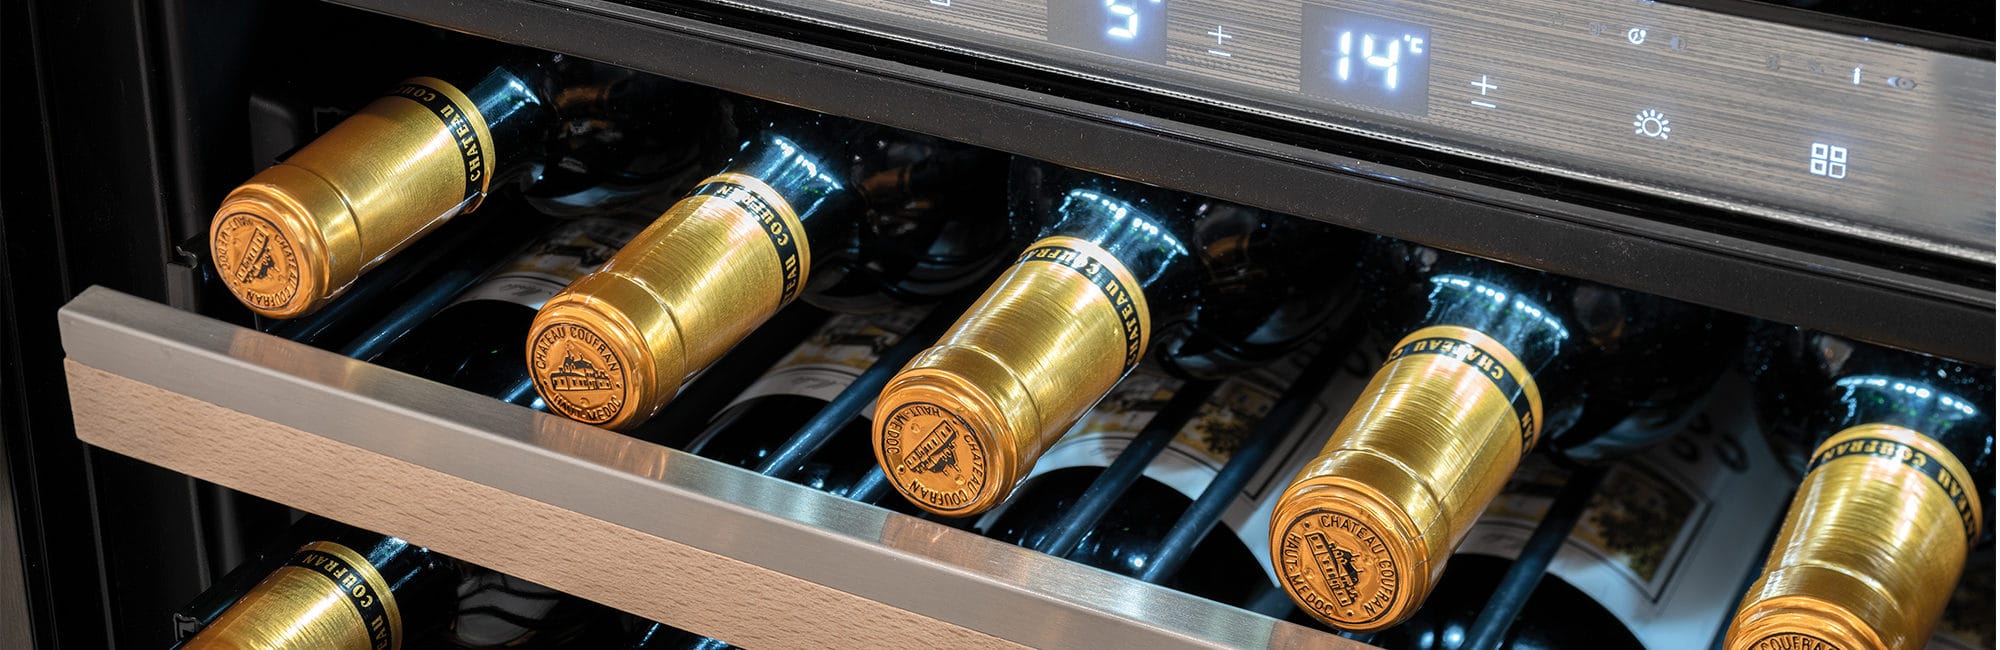 How to choose the best wine cooler | Caple